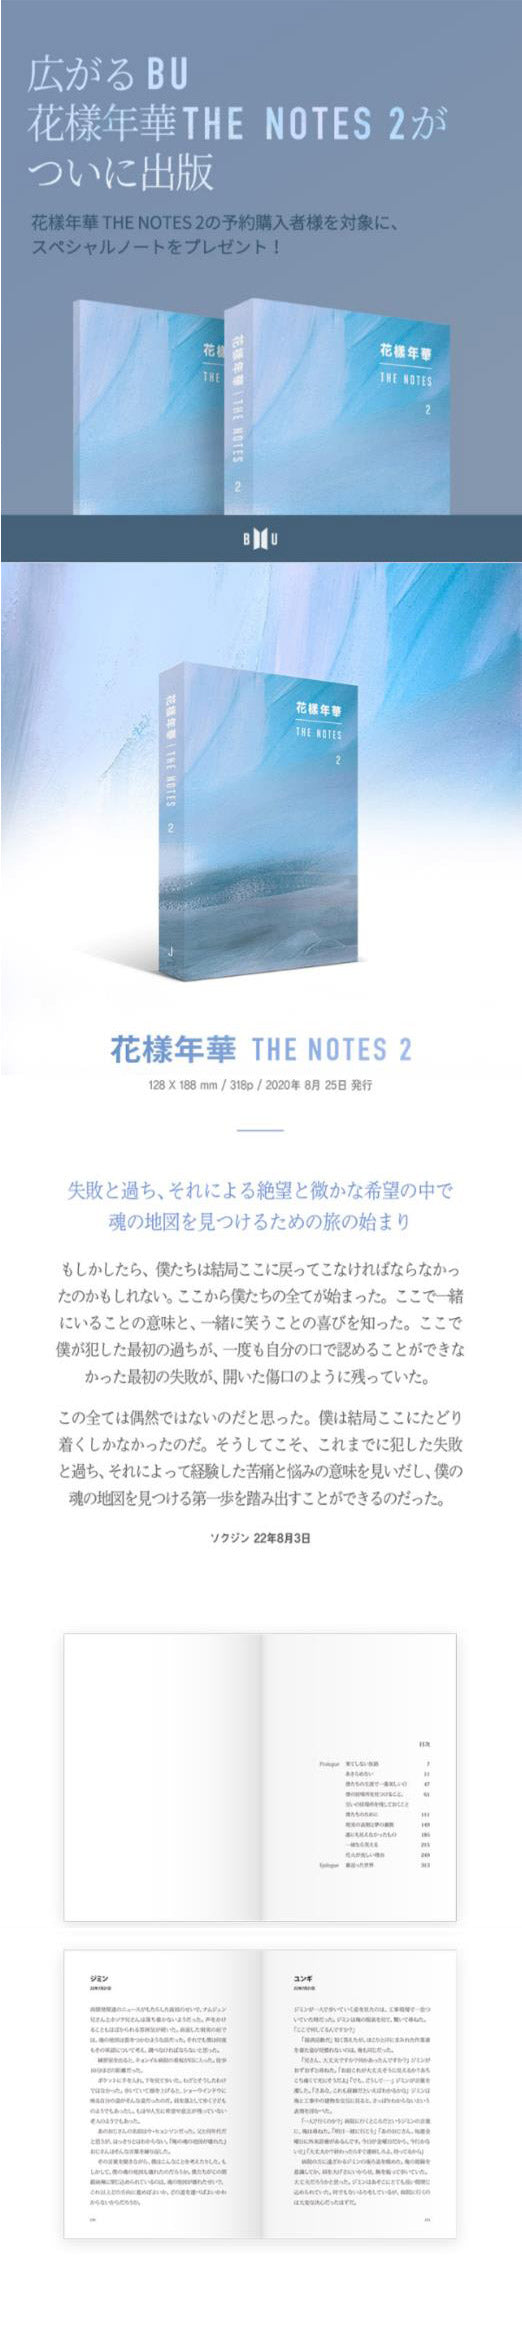 BTS - [花樣年華 The Most Beautiful Moment In Life] The Notes 2 JAPANESE Version